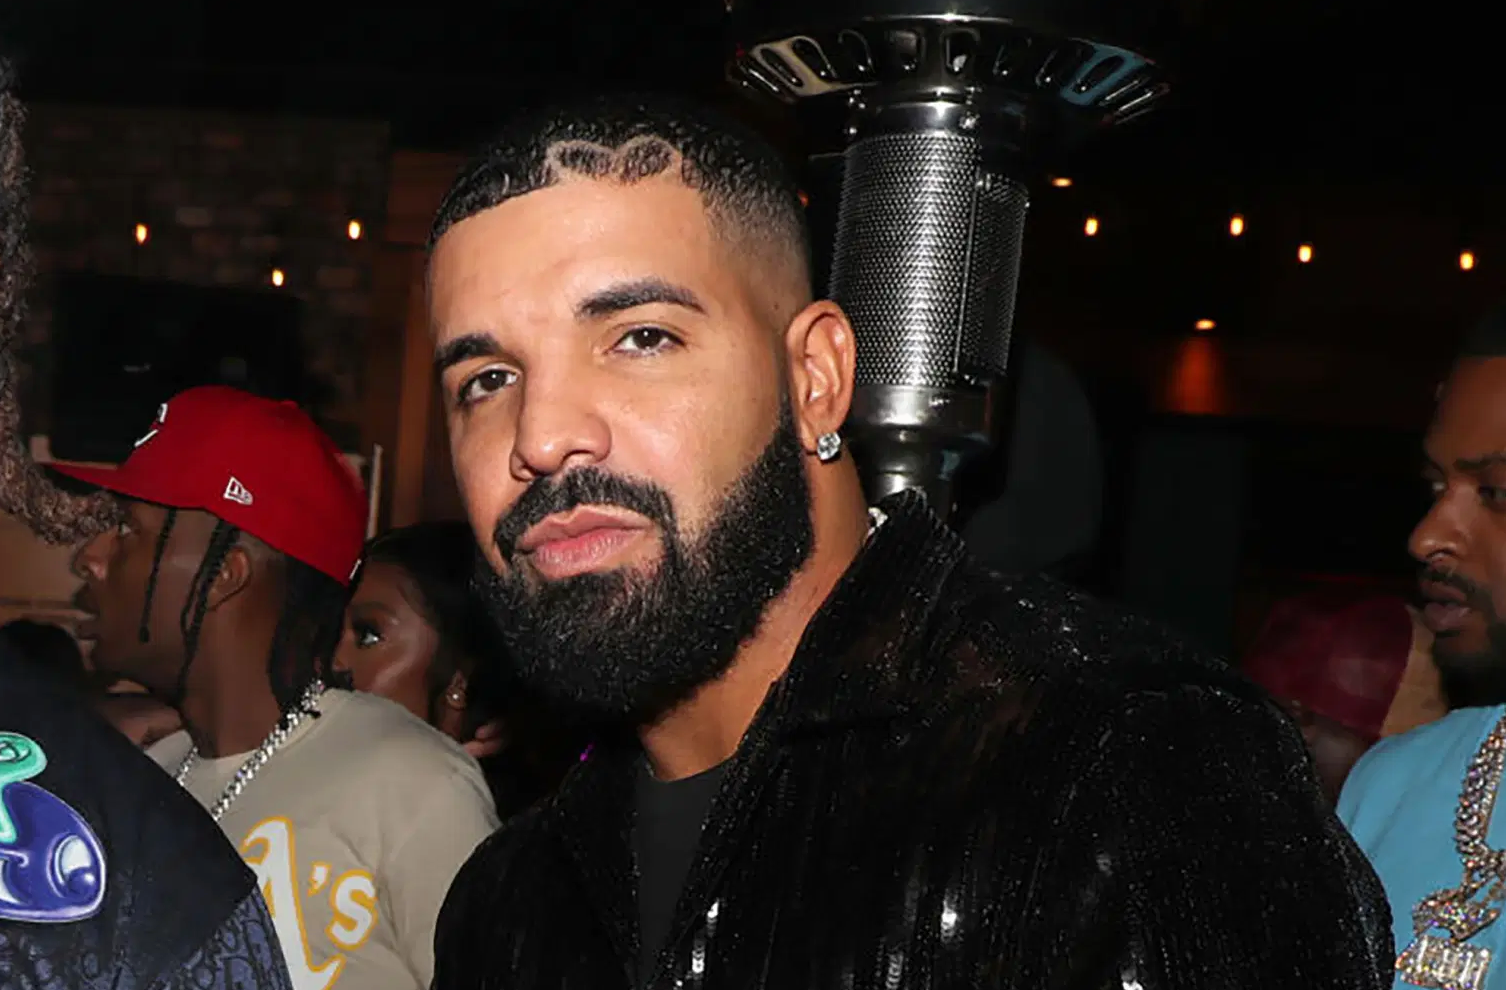 Drake's 'Certified Lover Boy' Projected to Overtake Kanye West's 'DONDA' for Biggest Debut Week of 2021